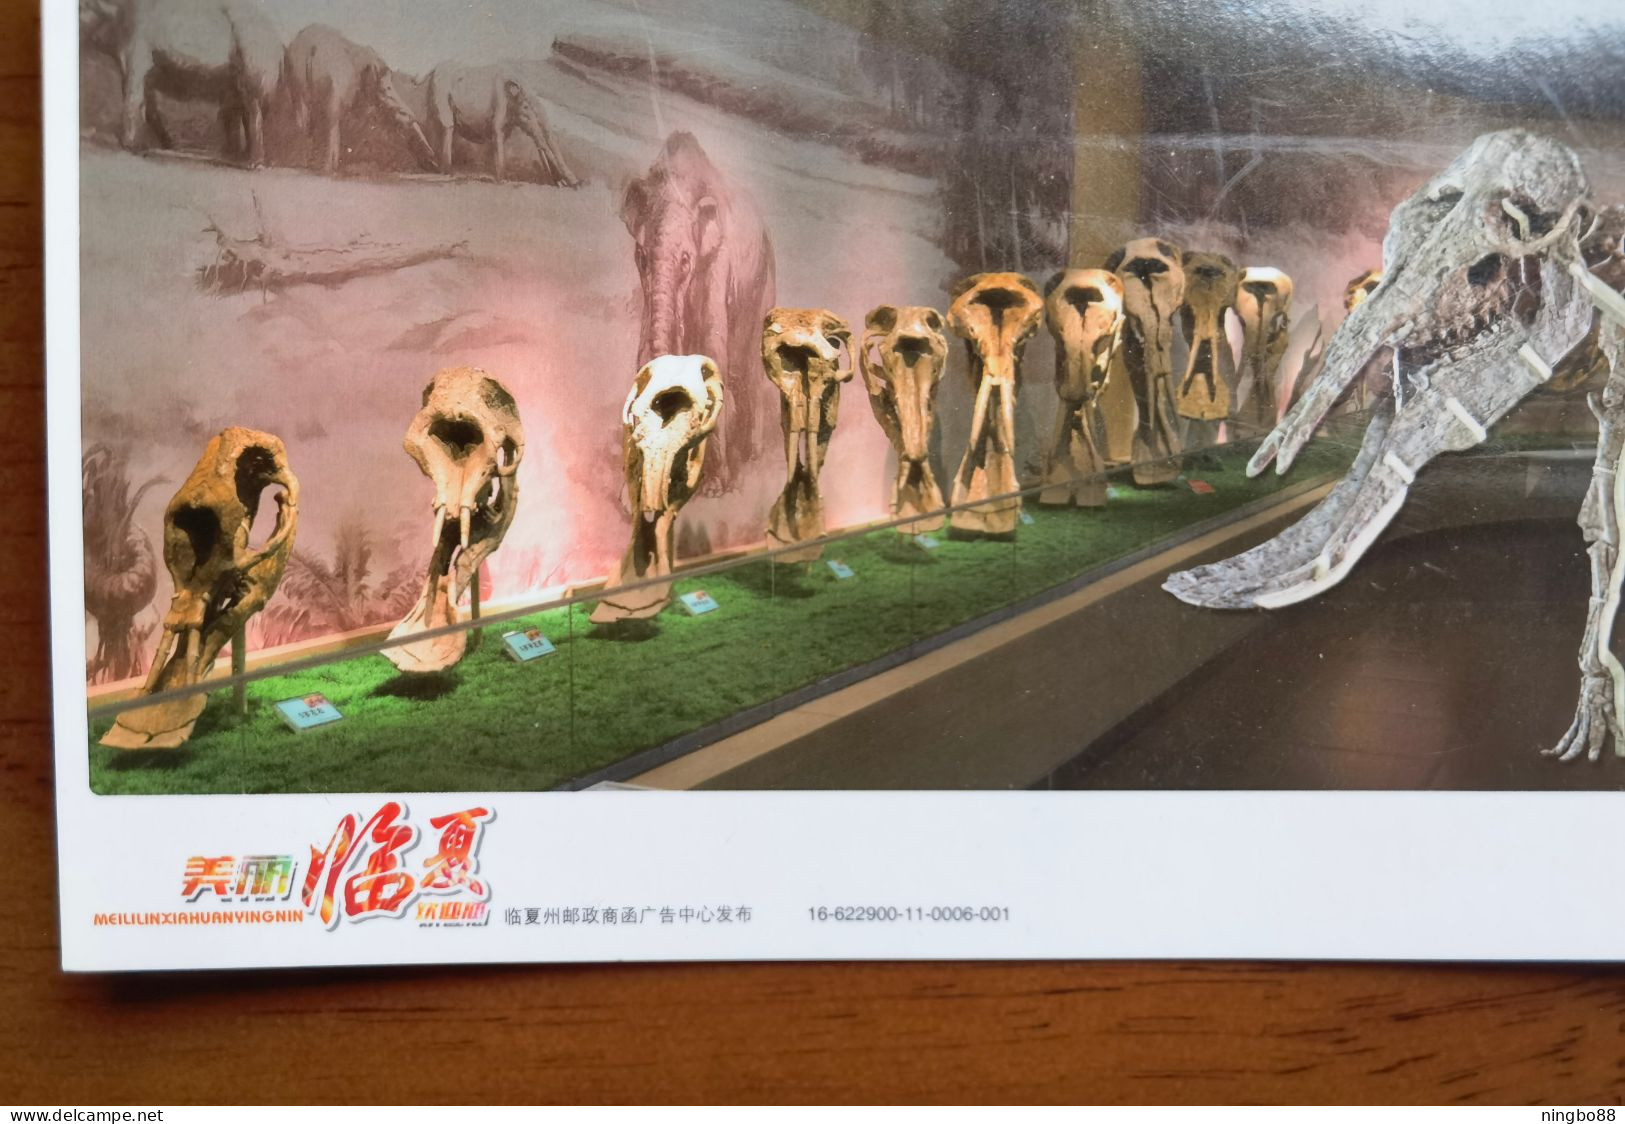 Linxia Platybelodon Danovi Elephant Fossil,China 2016 Hezheng Ancient Animal Fossil Museum Advertising Pre-stamped Card - Fósiles